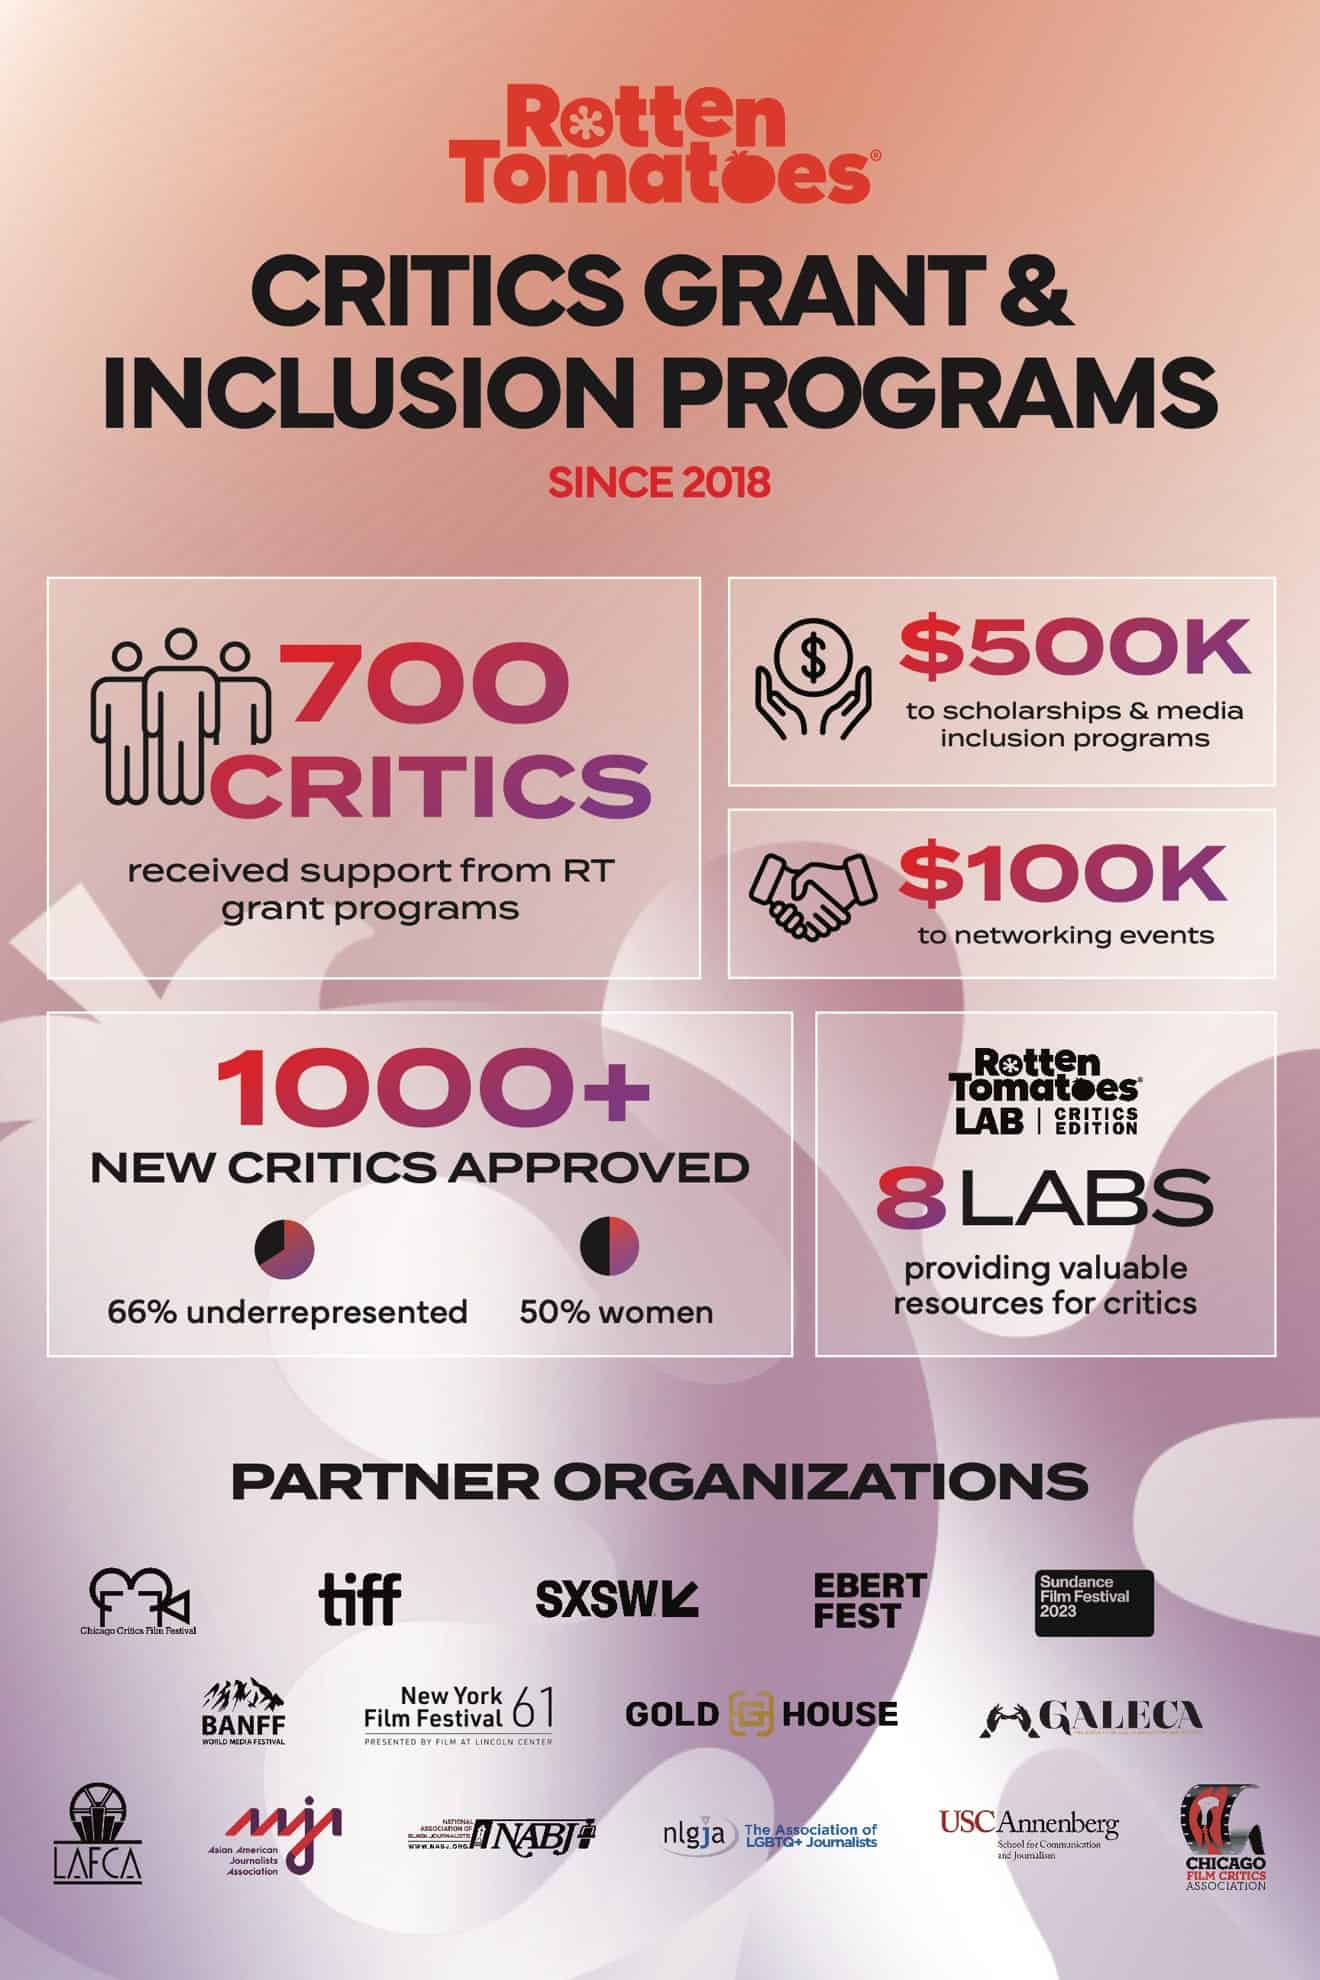 Rotten Tomatoes Celebrates 5 Years of Championing Inclusive Criticism 19